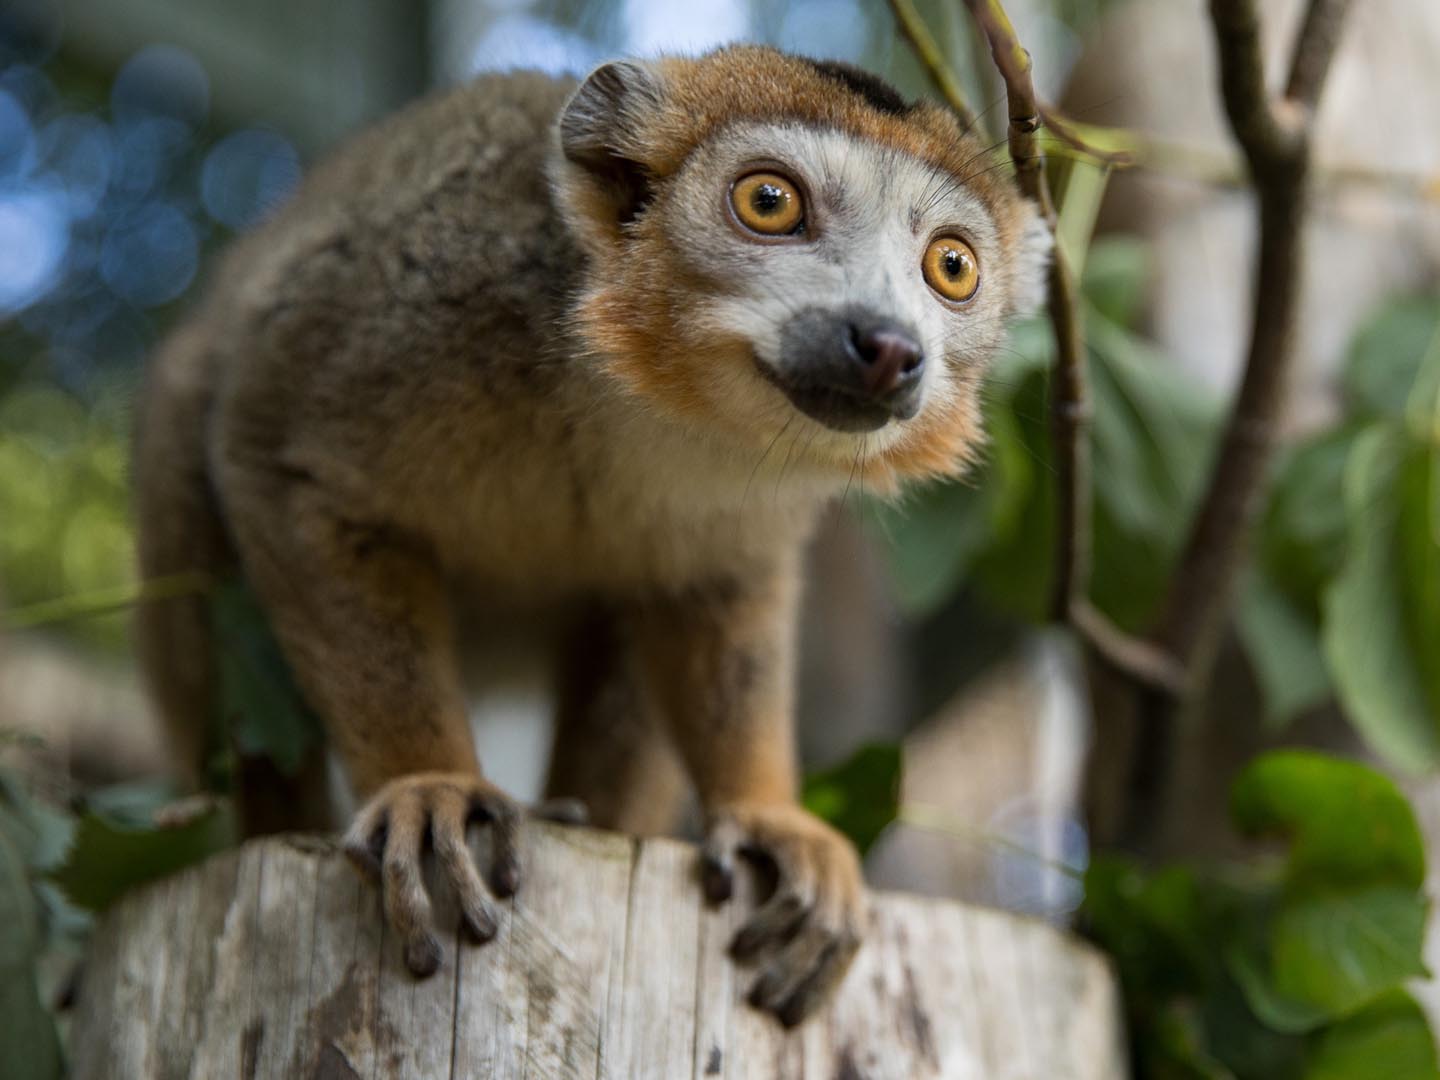 Crowned lemur sitting on a branch looking off-camera